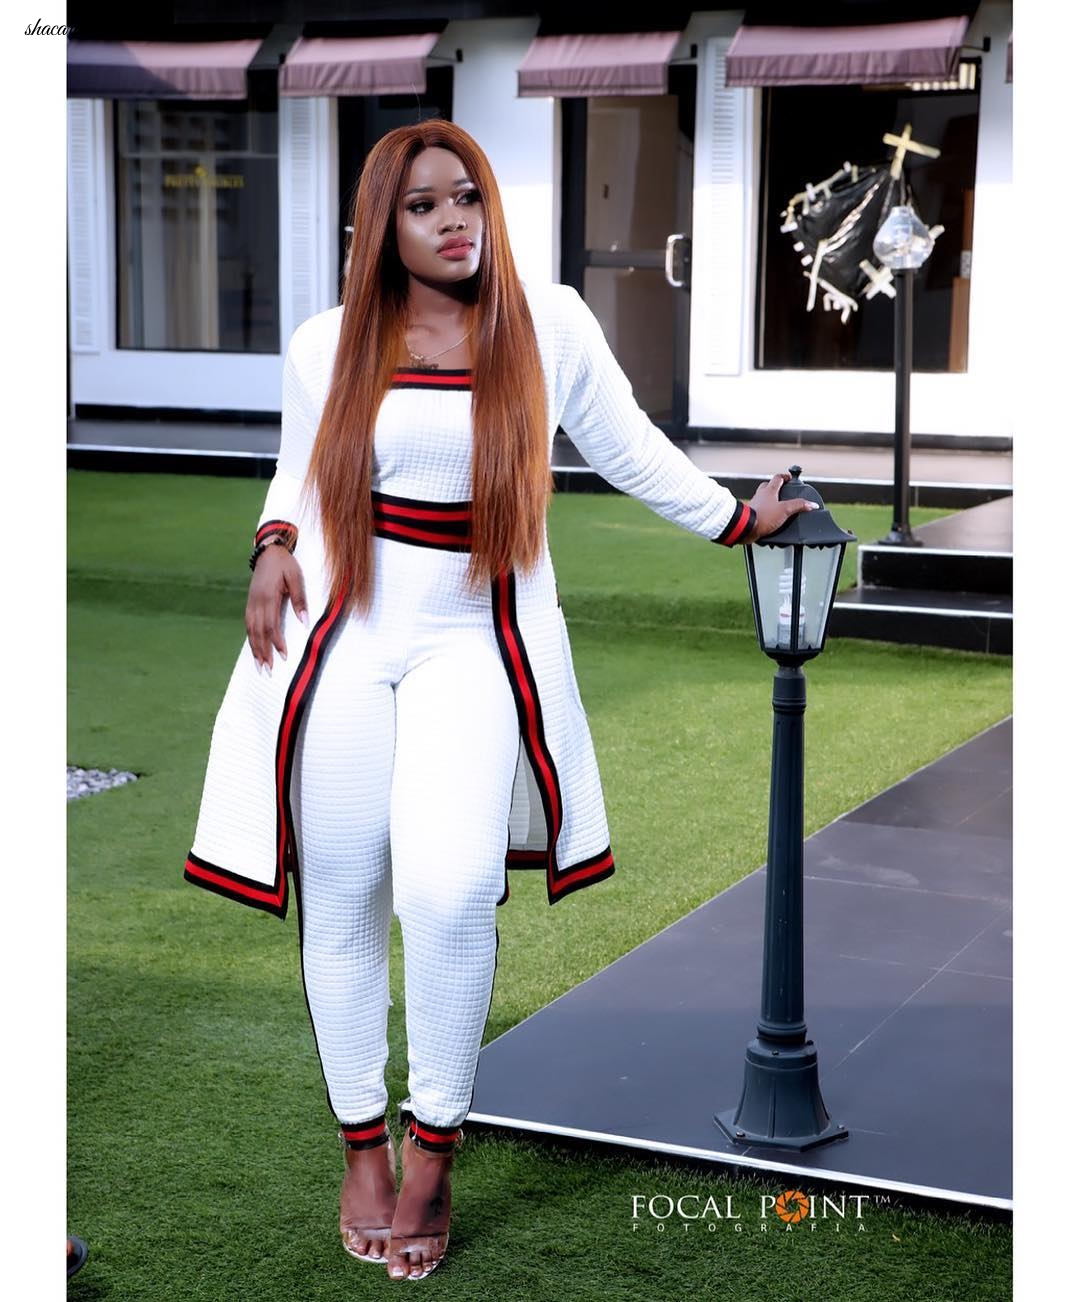 Cee-C Serves Up Weekend Outfit Inspiration In Stunning 3-Piece Combo